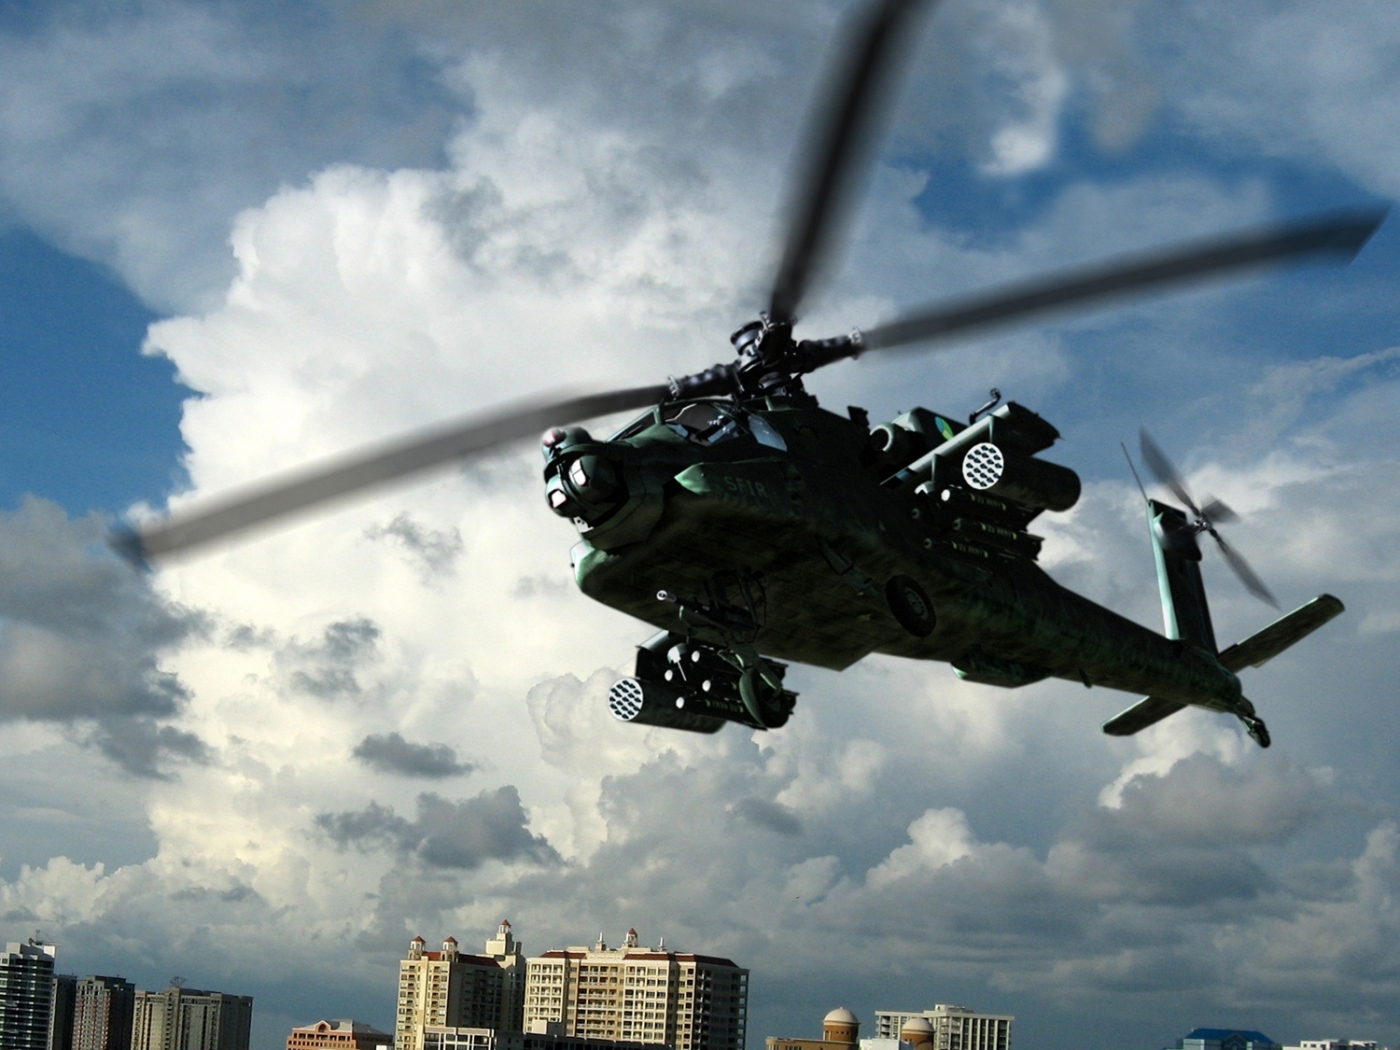 helicopters, transport lock screen backgrounds